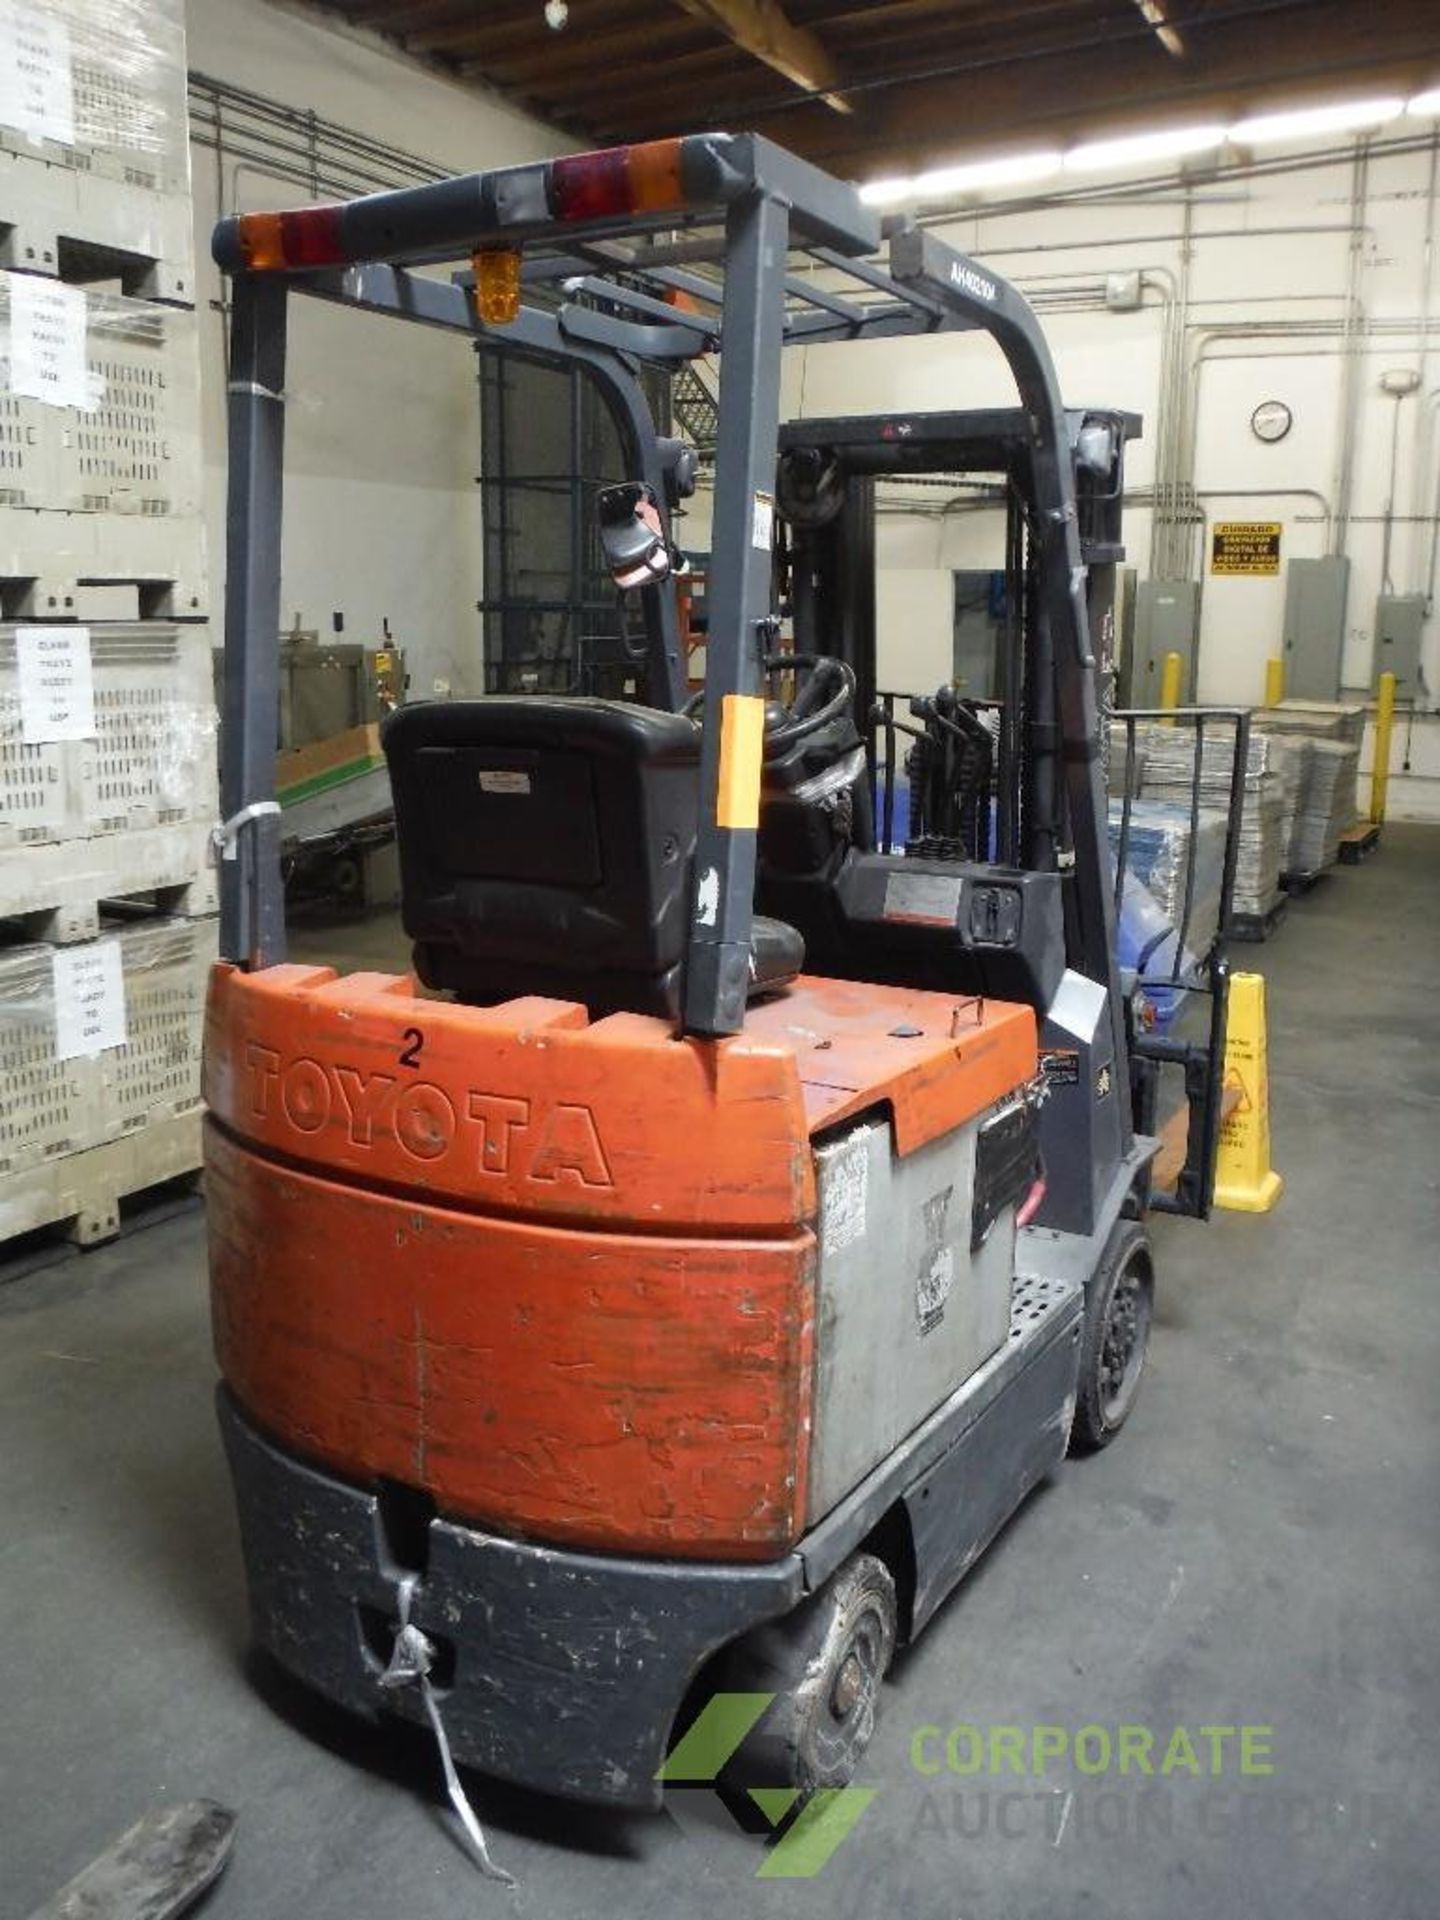 Toyota 36 volt electric fork lift, Model 7FBCU20, SN 60989, 3500 lb. capacity, side shift, 3 stage - Image 5 of 6